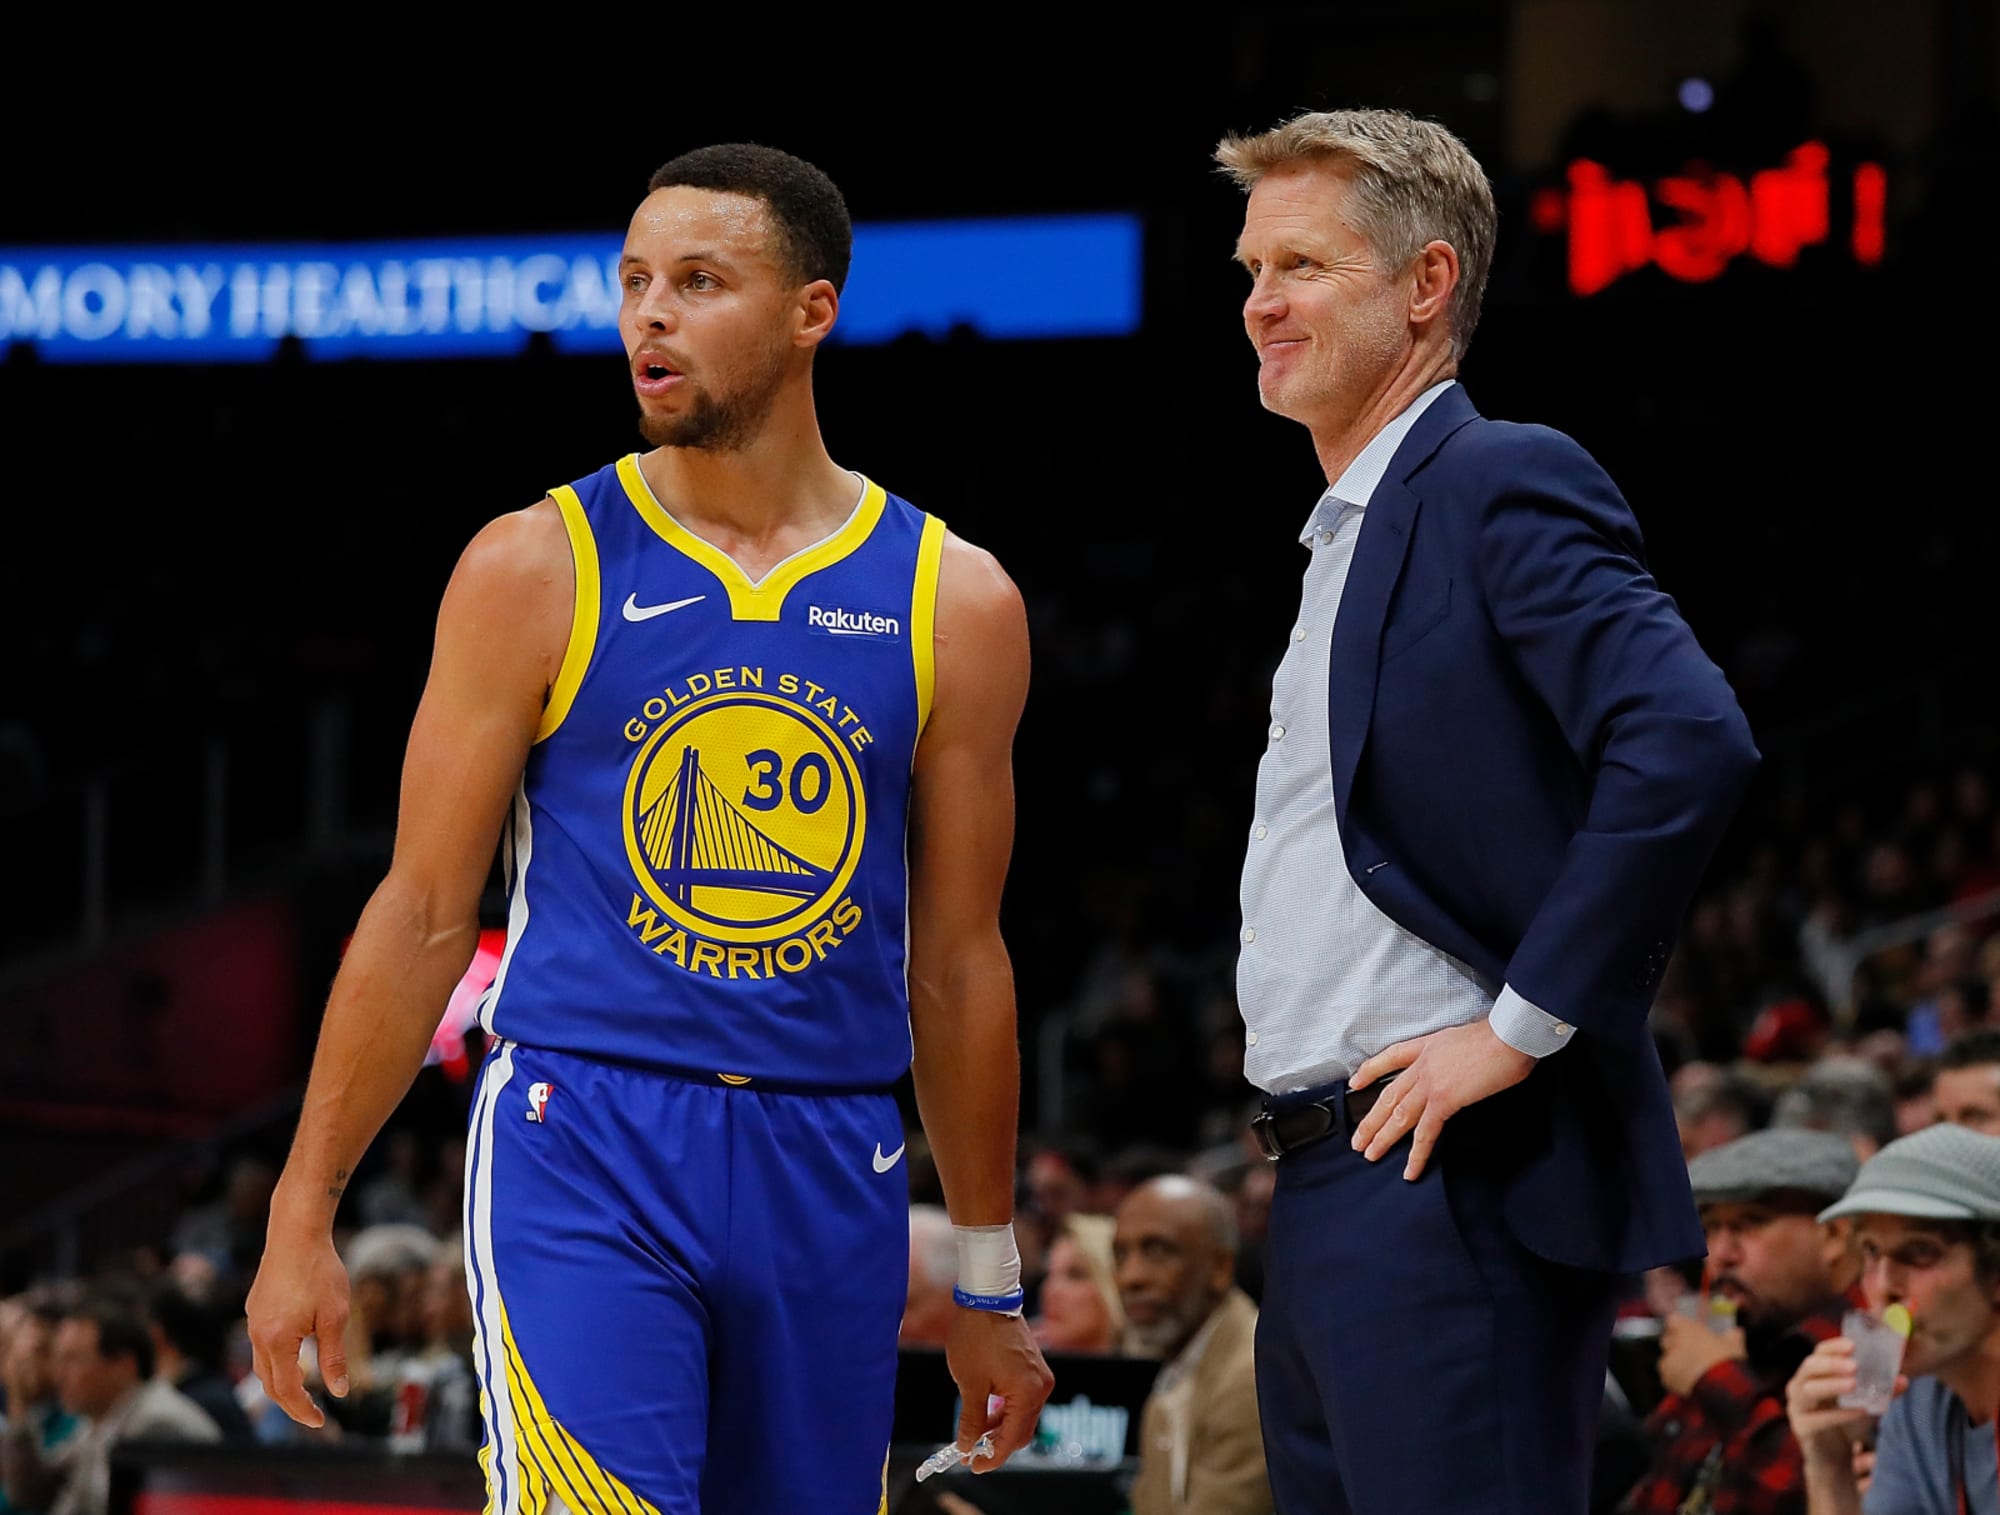 Uncertainty surrounds Steve Kerr's health and future with Golden State  Warriors